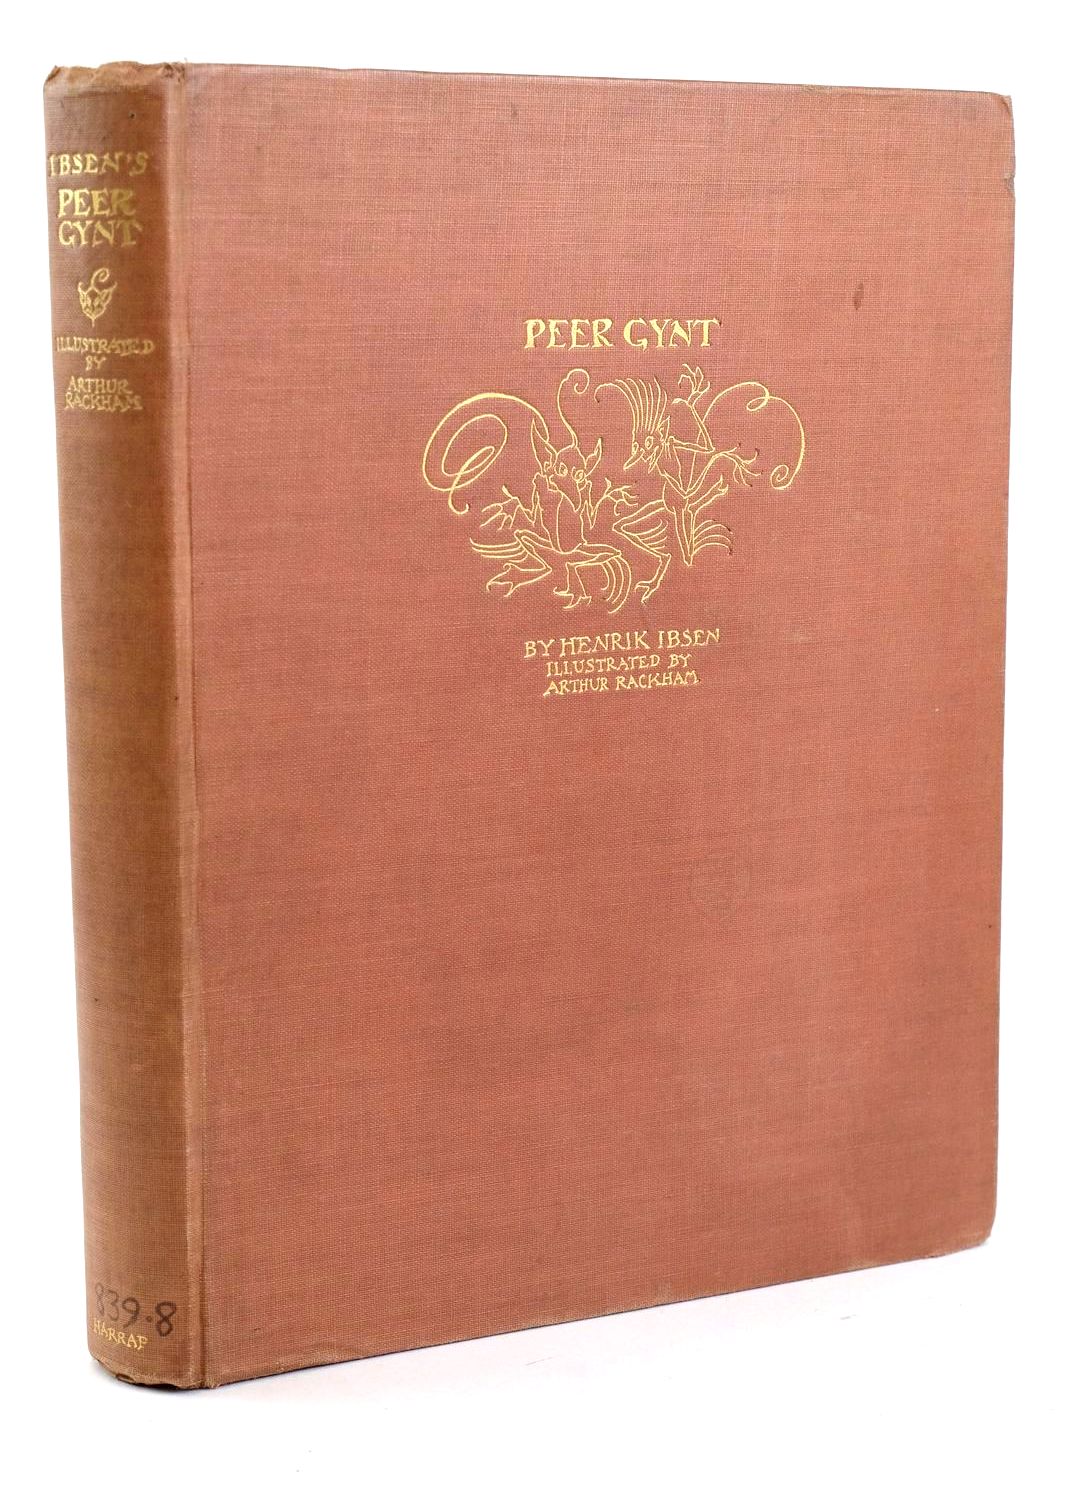 Photo of PEER GYNT written by Ibsen, Henrik illustrated by Rackham, Arthur published by George G. Harrap & Co. Ltd. (STOCK CODE: 1319042)  for sale by Stella & Rose's Books